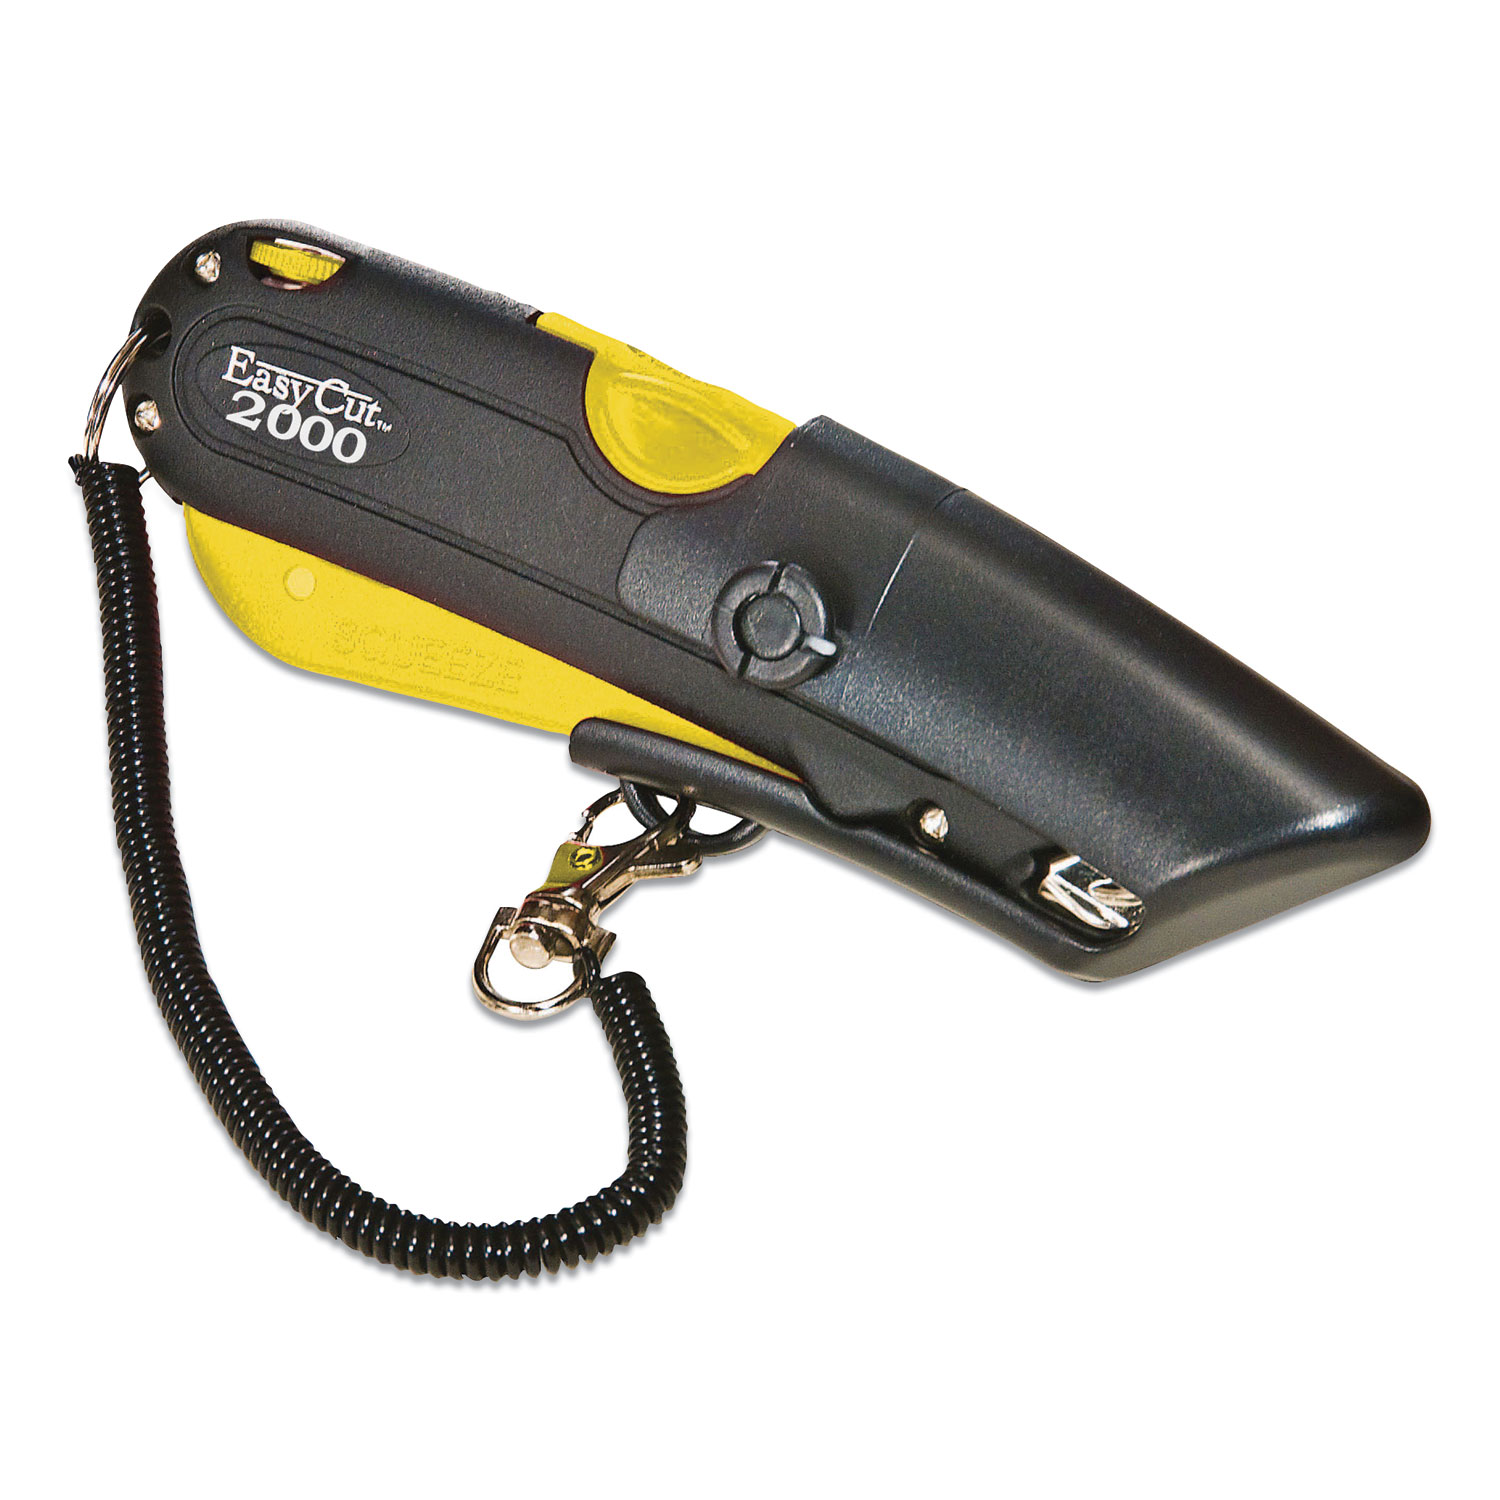 LabelMaster® Easy Cut 2000 Utility Knife, Yellow